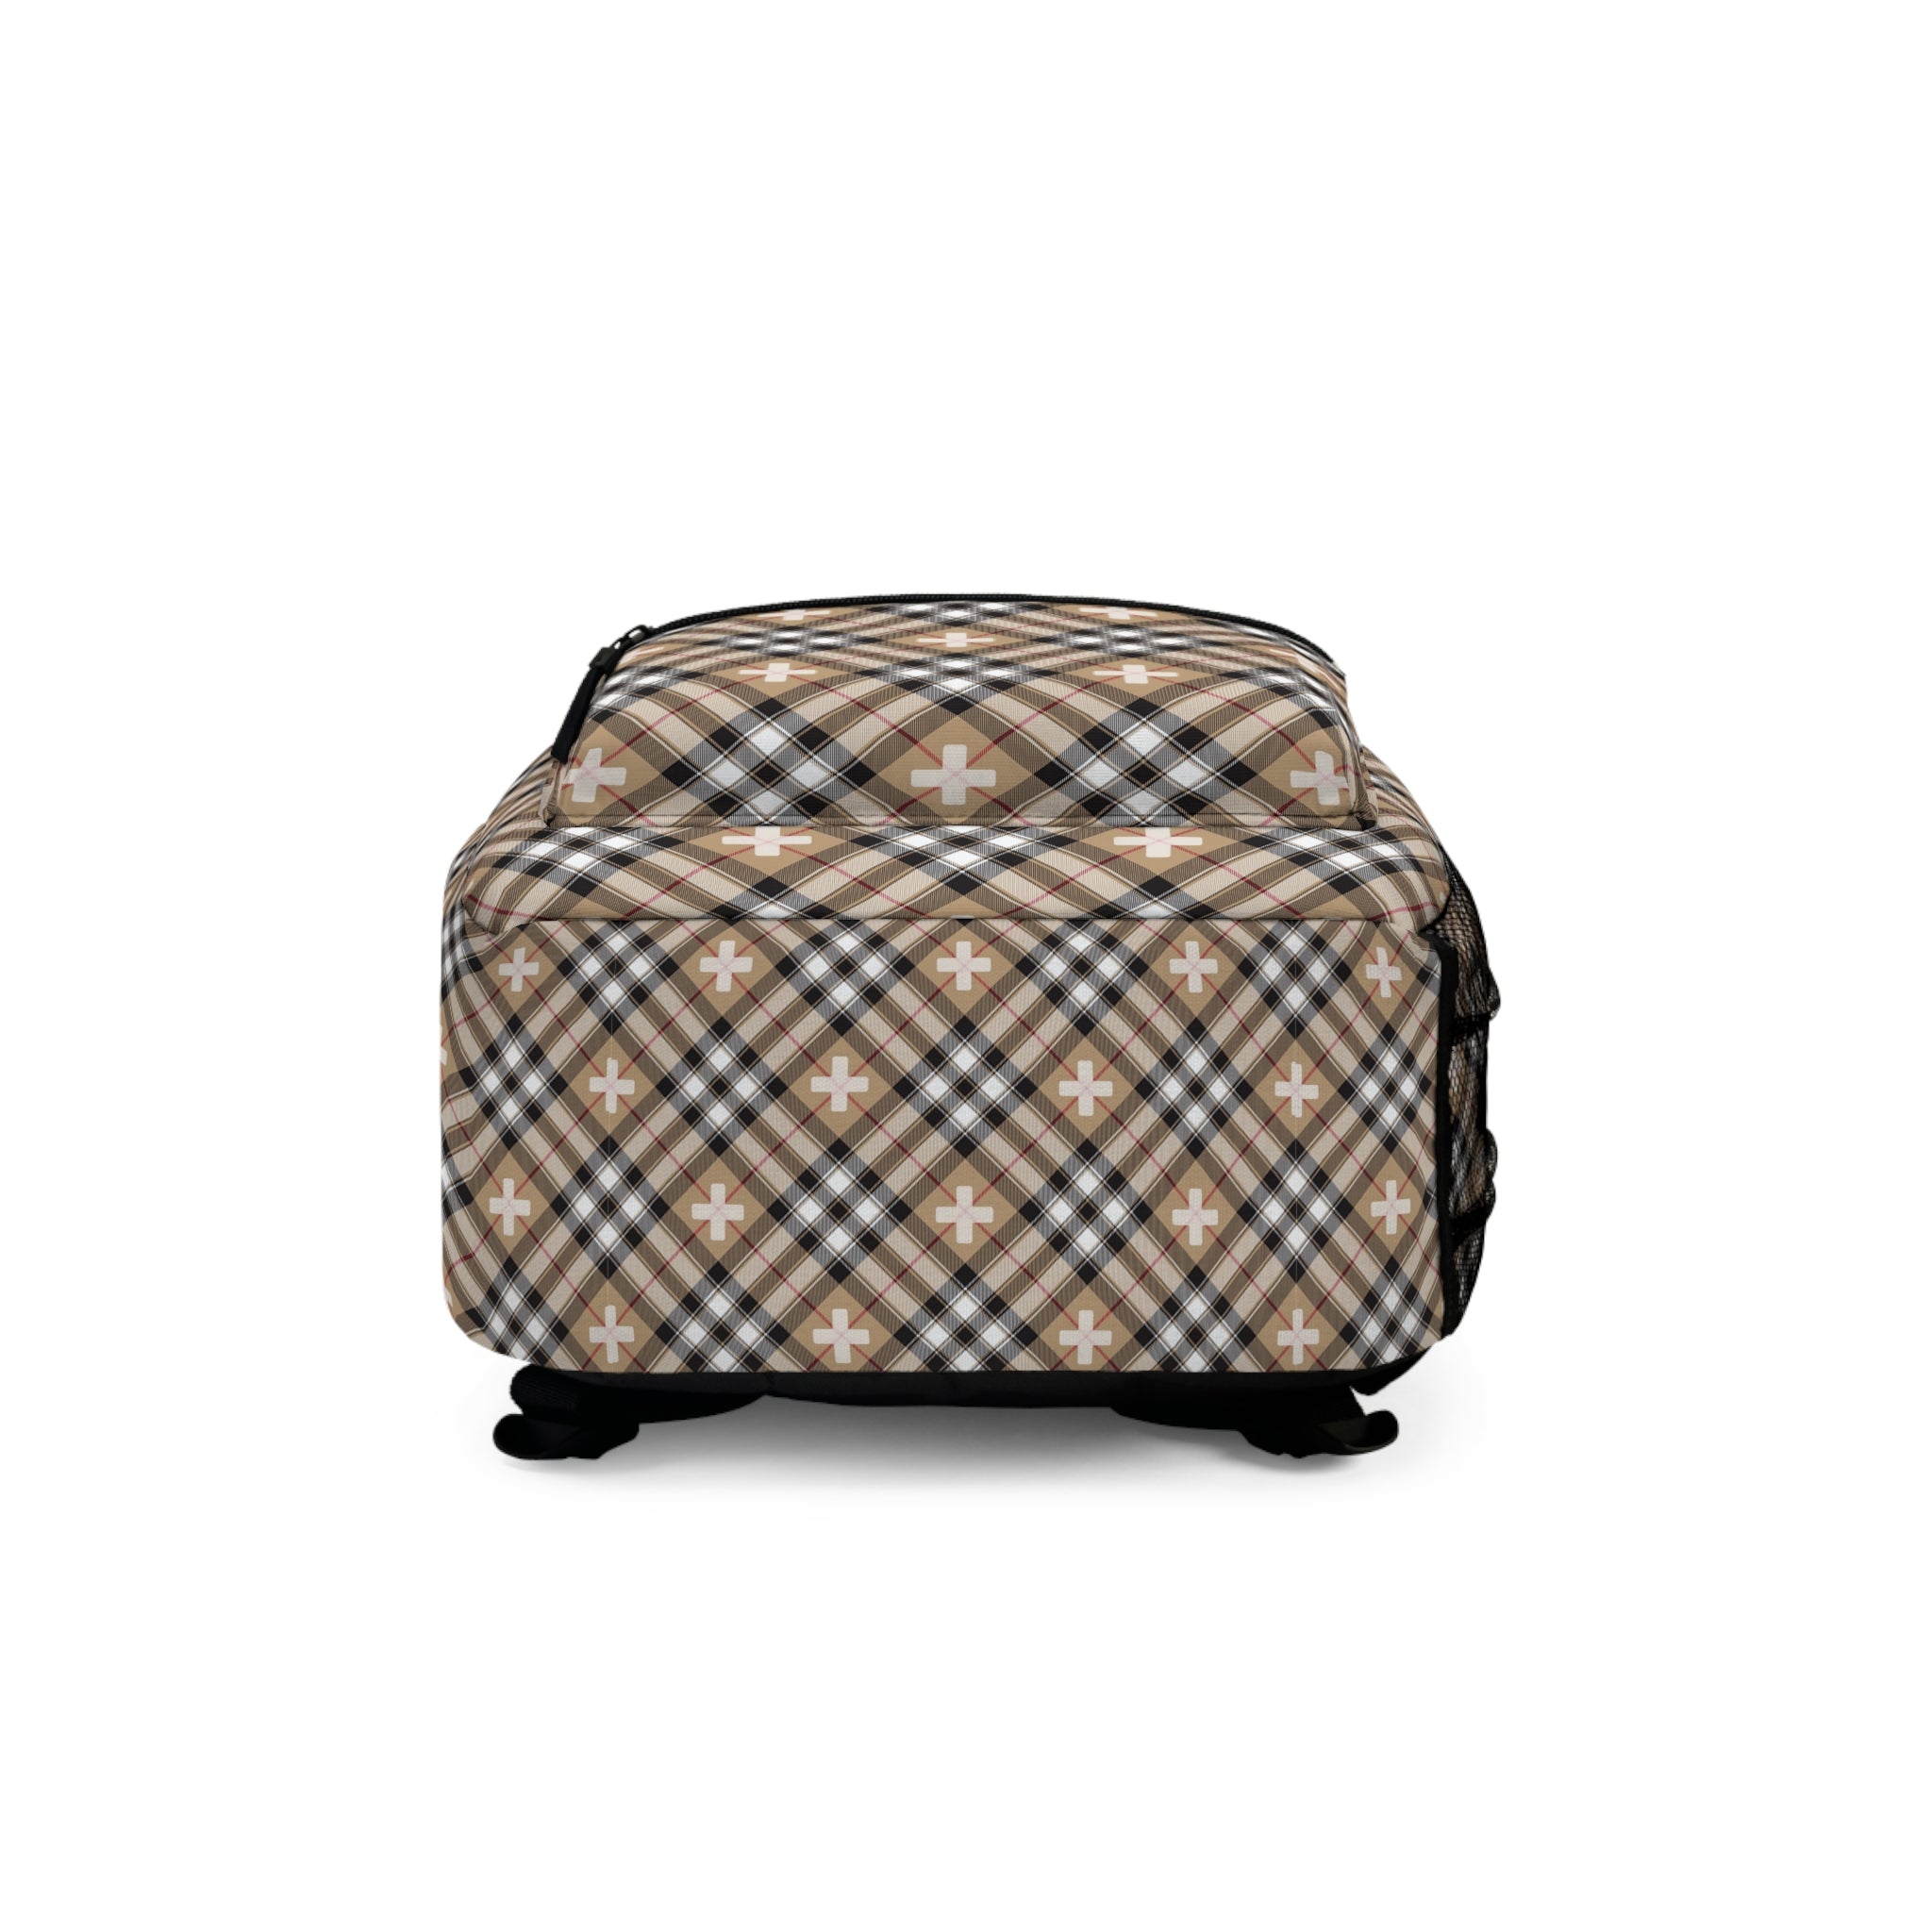  Abby Beige Pattern "Plus Sign" Backpack, Unisex Plaid Backpack Bags